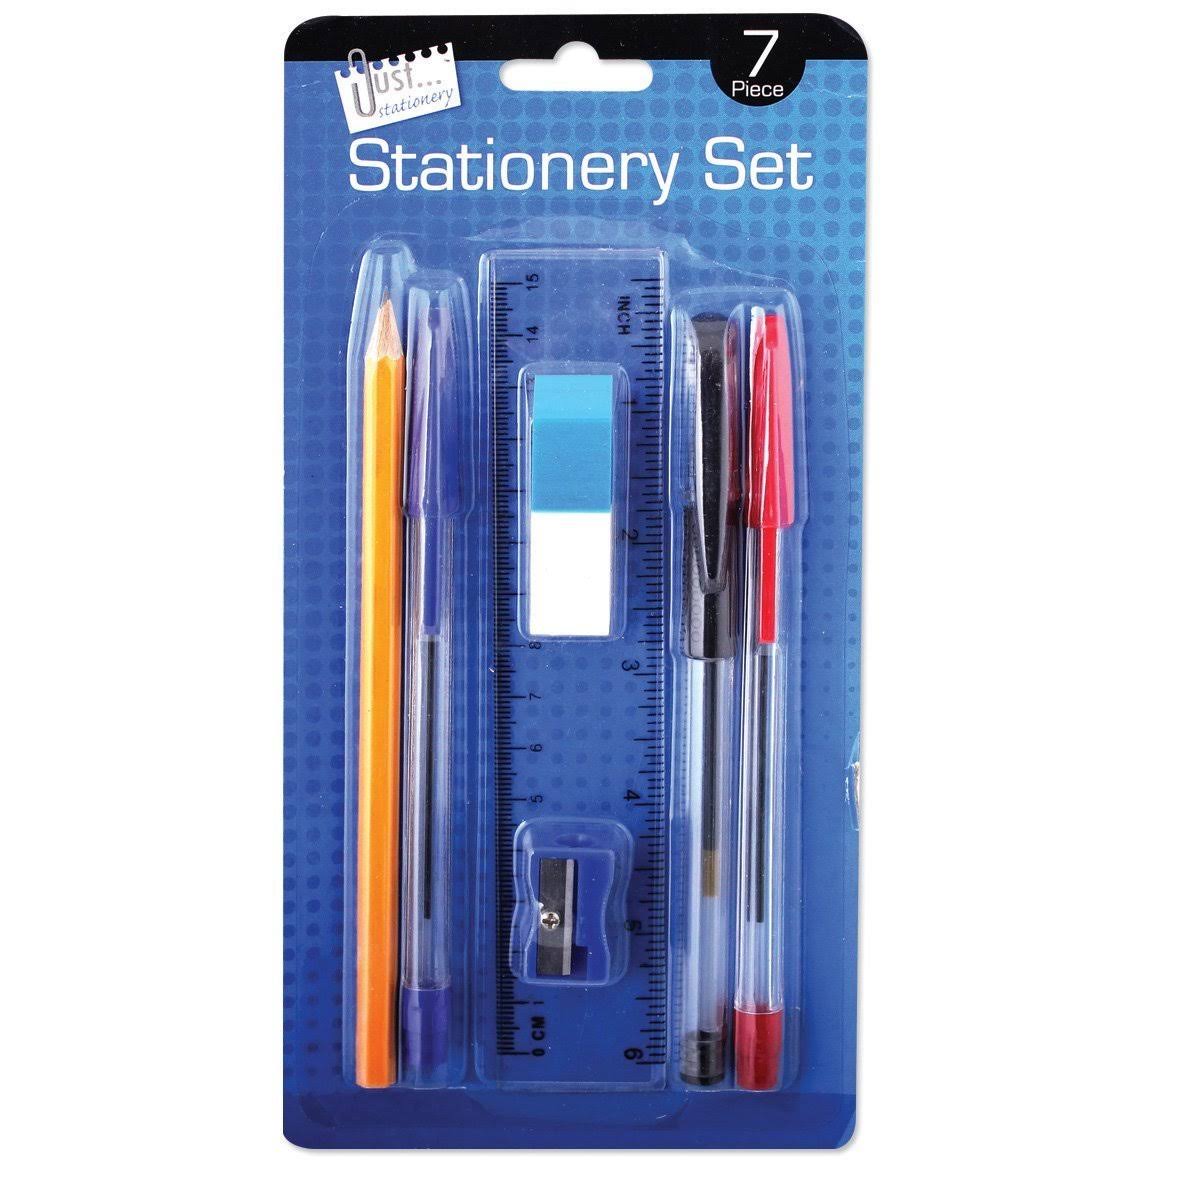 Just Stationery Set - 7 Pieces